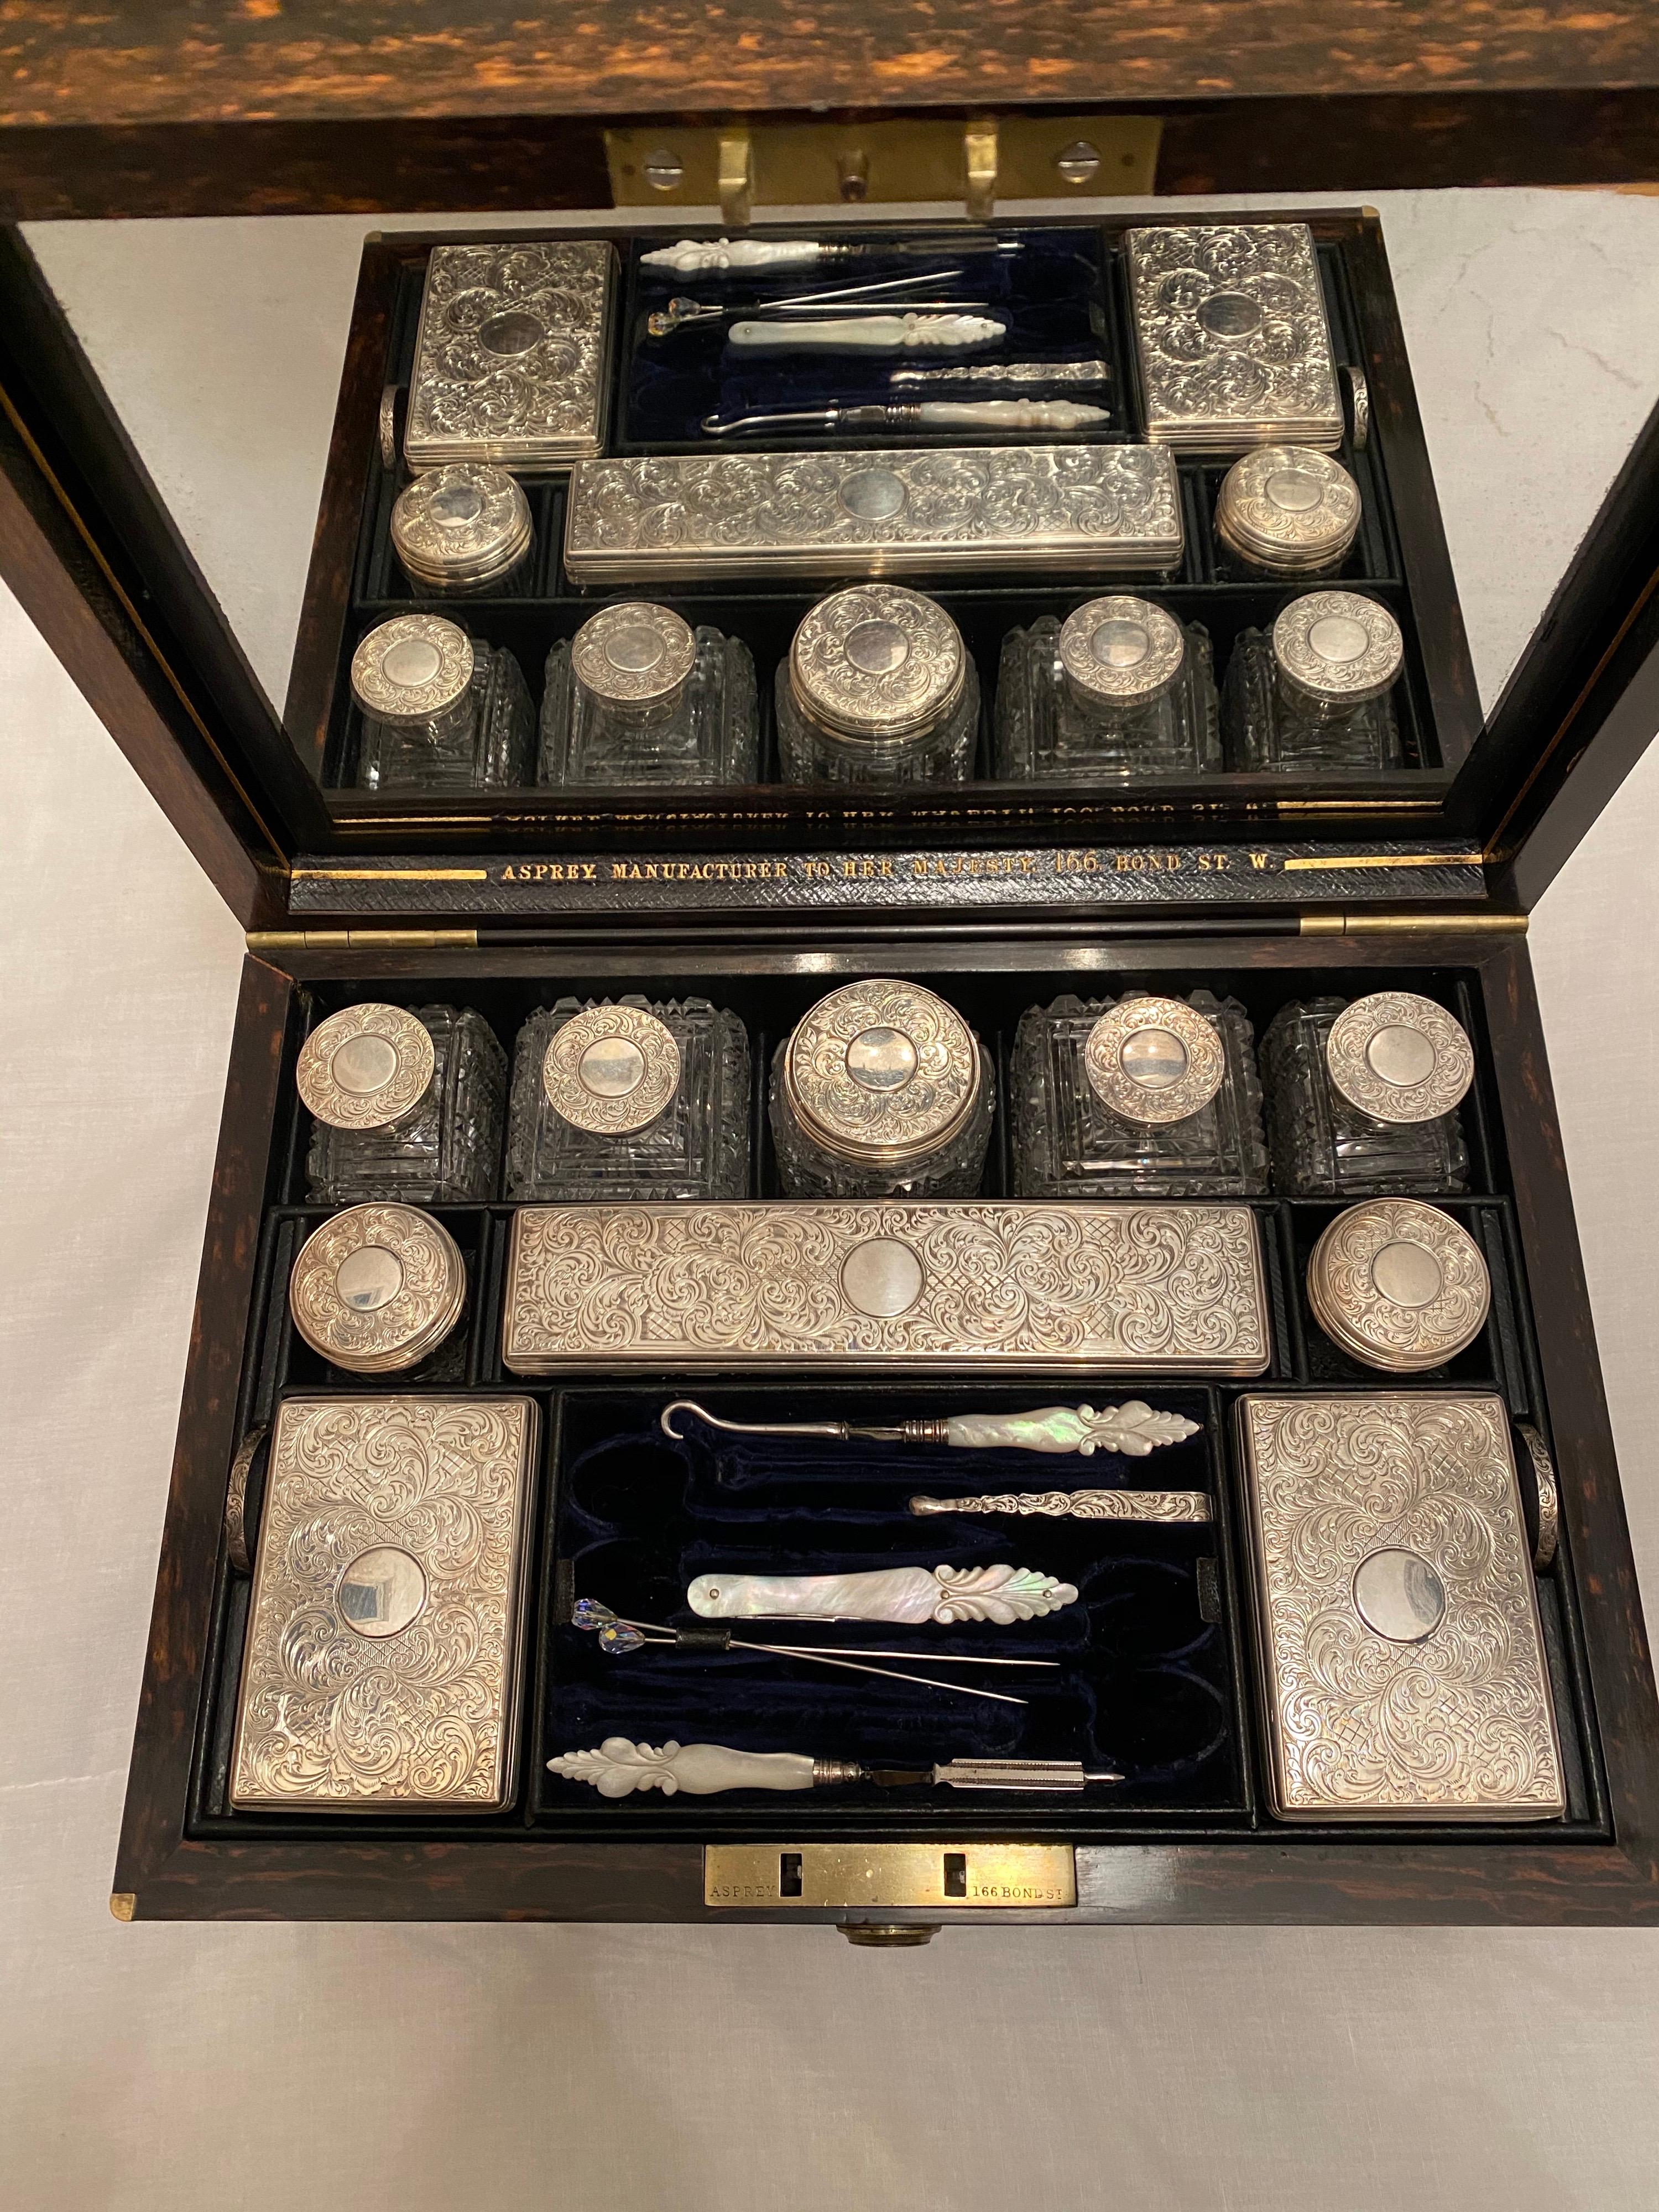 A  truly magnificent and original dressing box by Asprey - 166 Bond Street Manufacturers to HM The Queen. 

Hallmarked 1862, this is the same year as The Great London Exposition and Asprey was awarded The Queen Victoria Royal Warrant for their